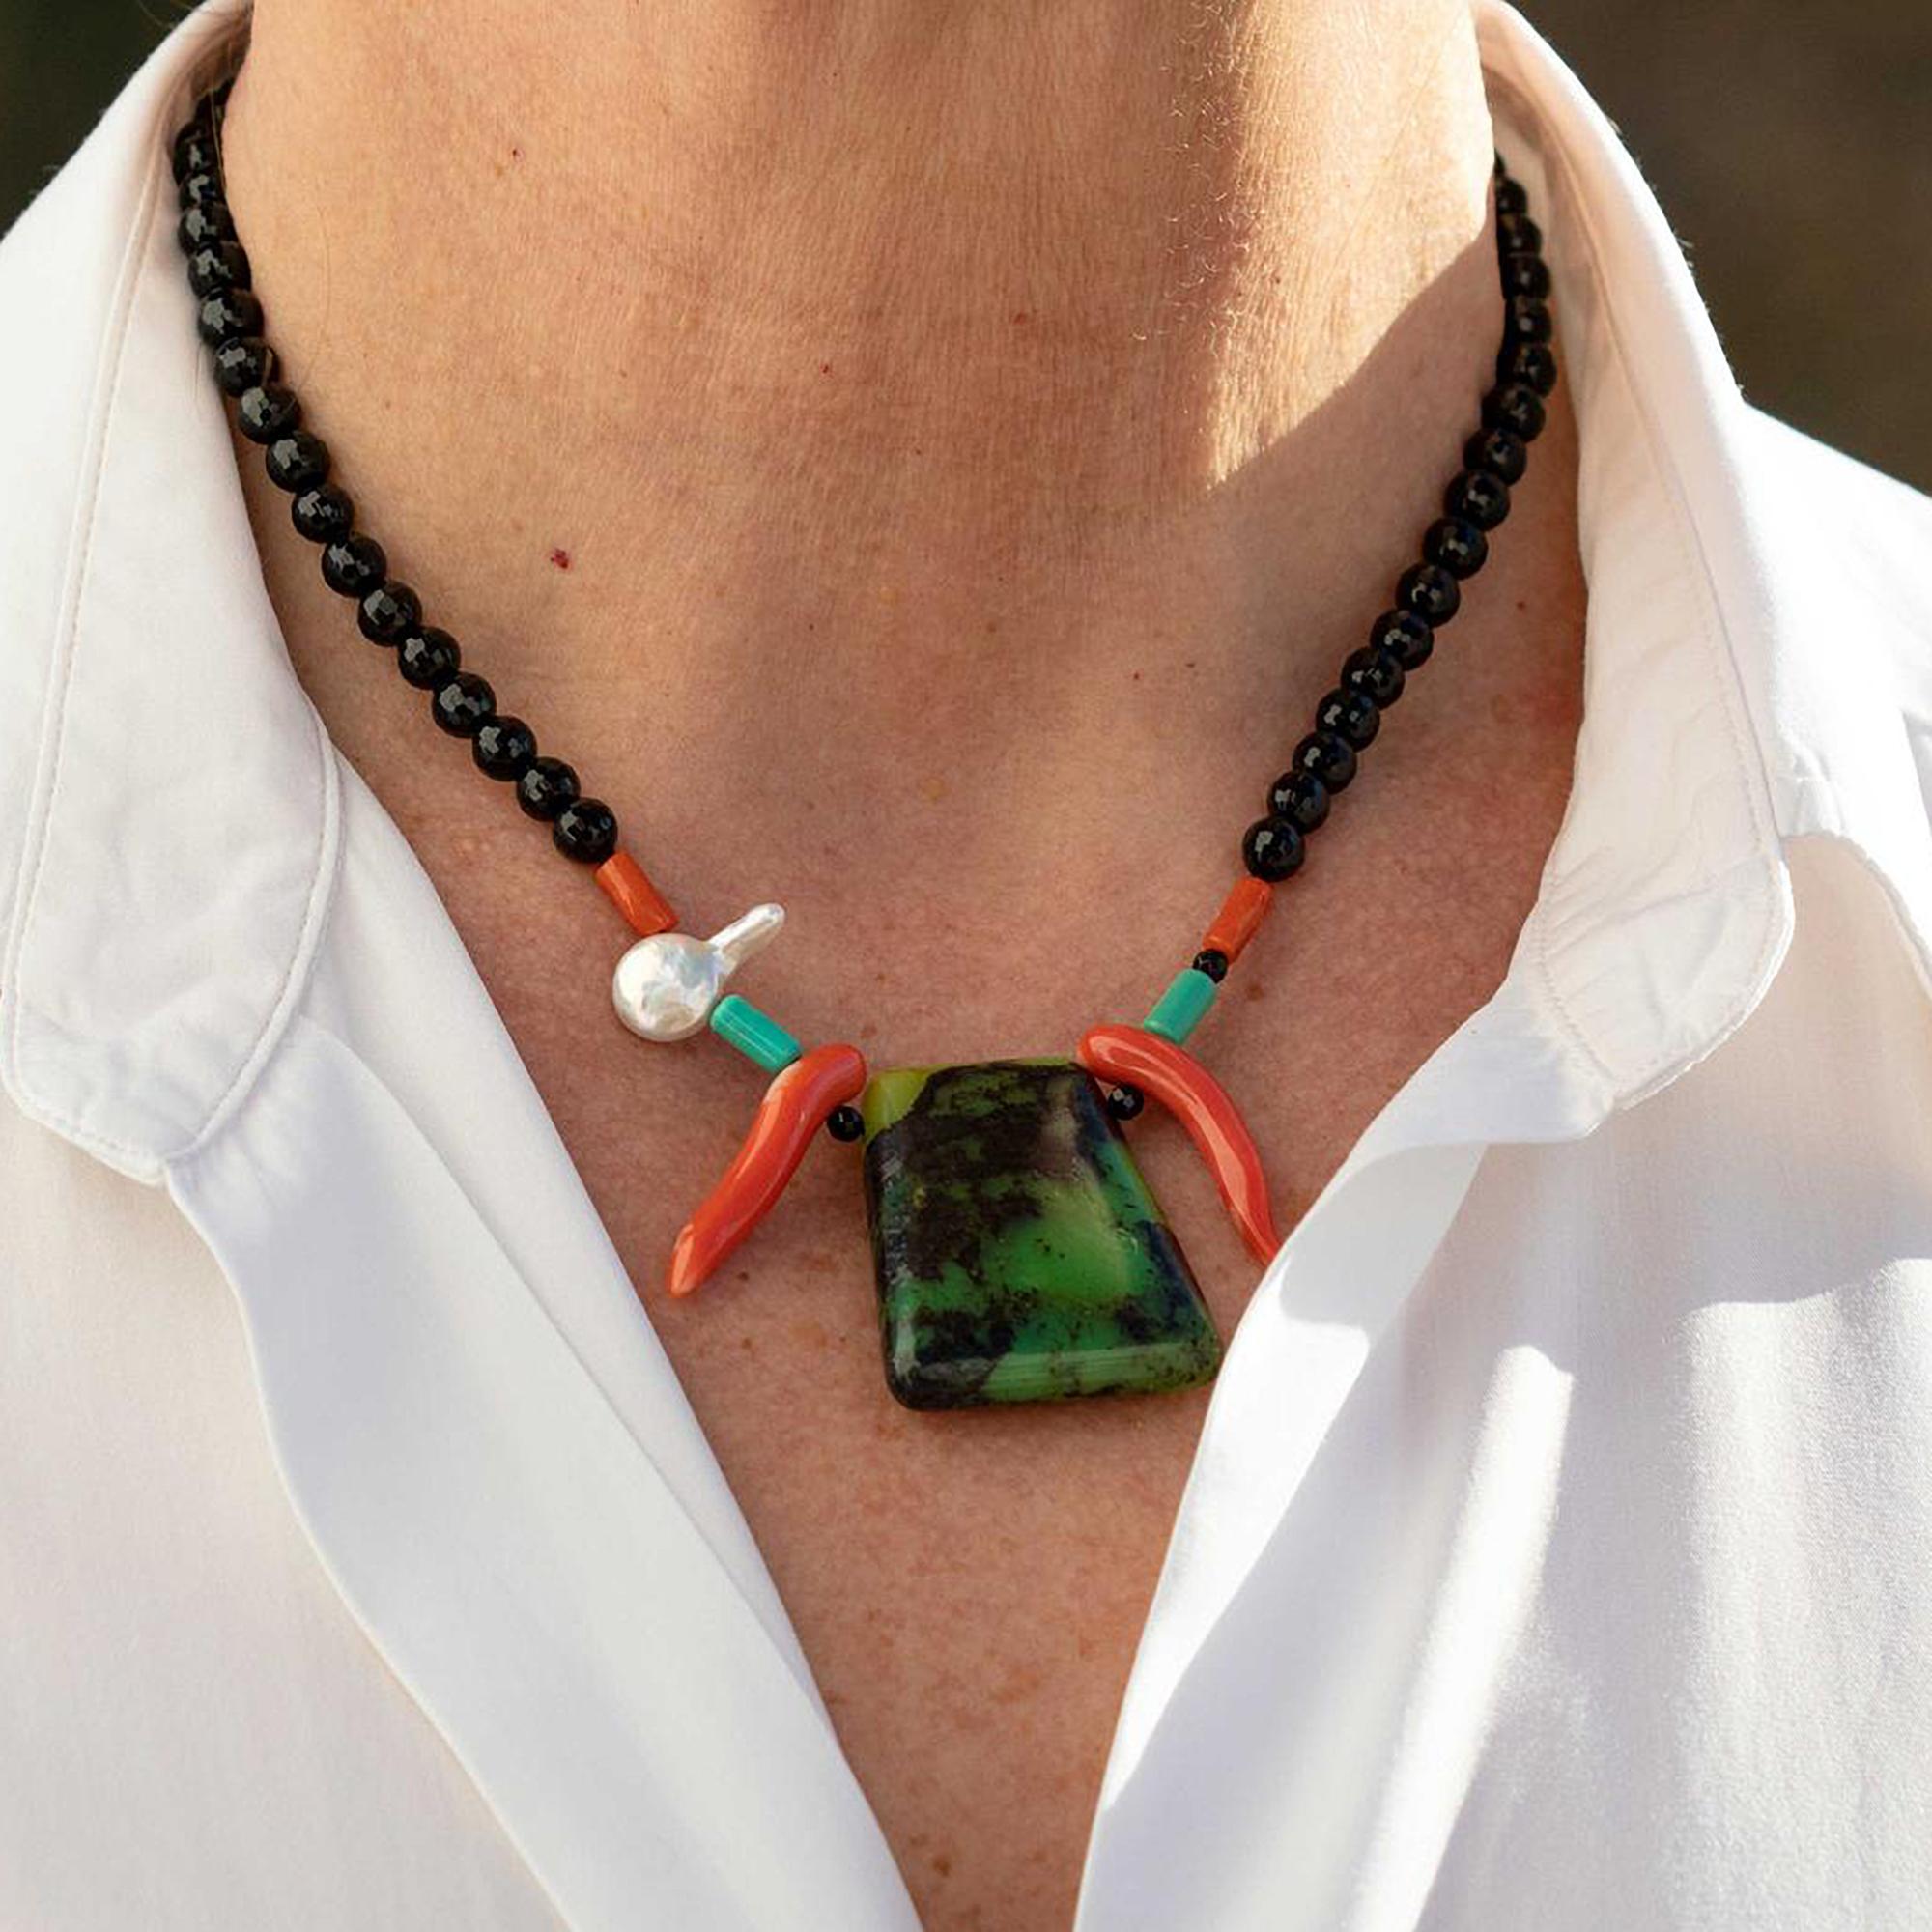 A unique design made with black Agate, Turquoise, Coral and a central pendant of Chrysoprase. Handmade in Italy with fine precious stones, ethical and natural. Fits with elegant outfits as well as for a casual look. Enjoy the brightness of Natural